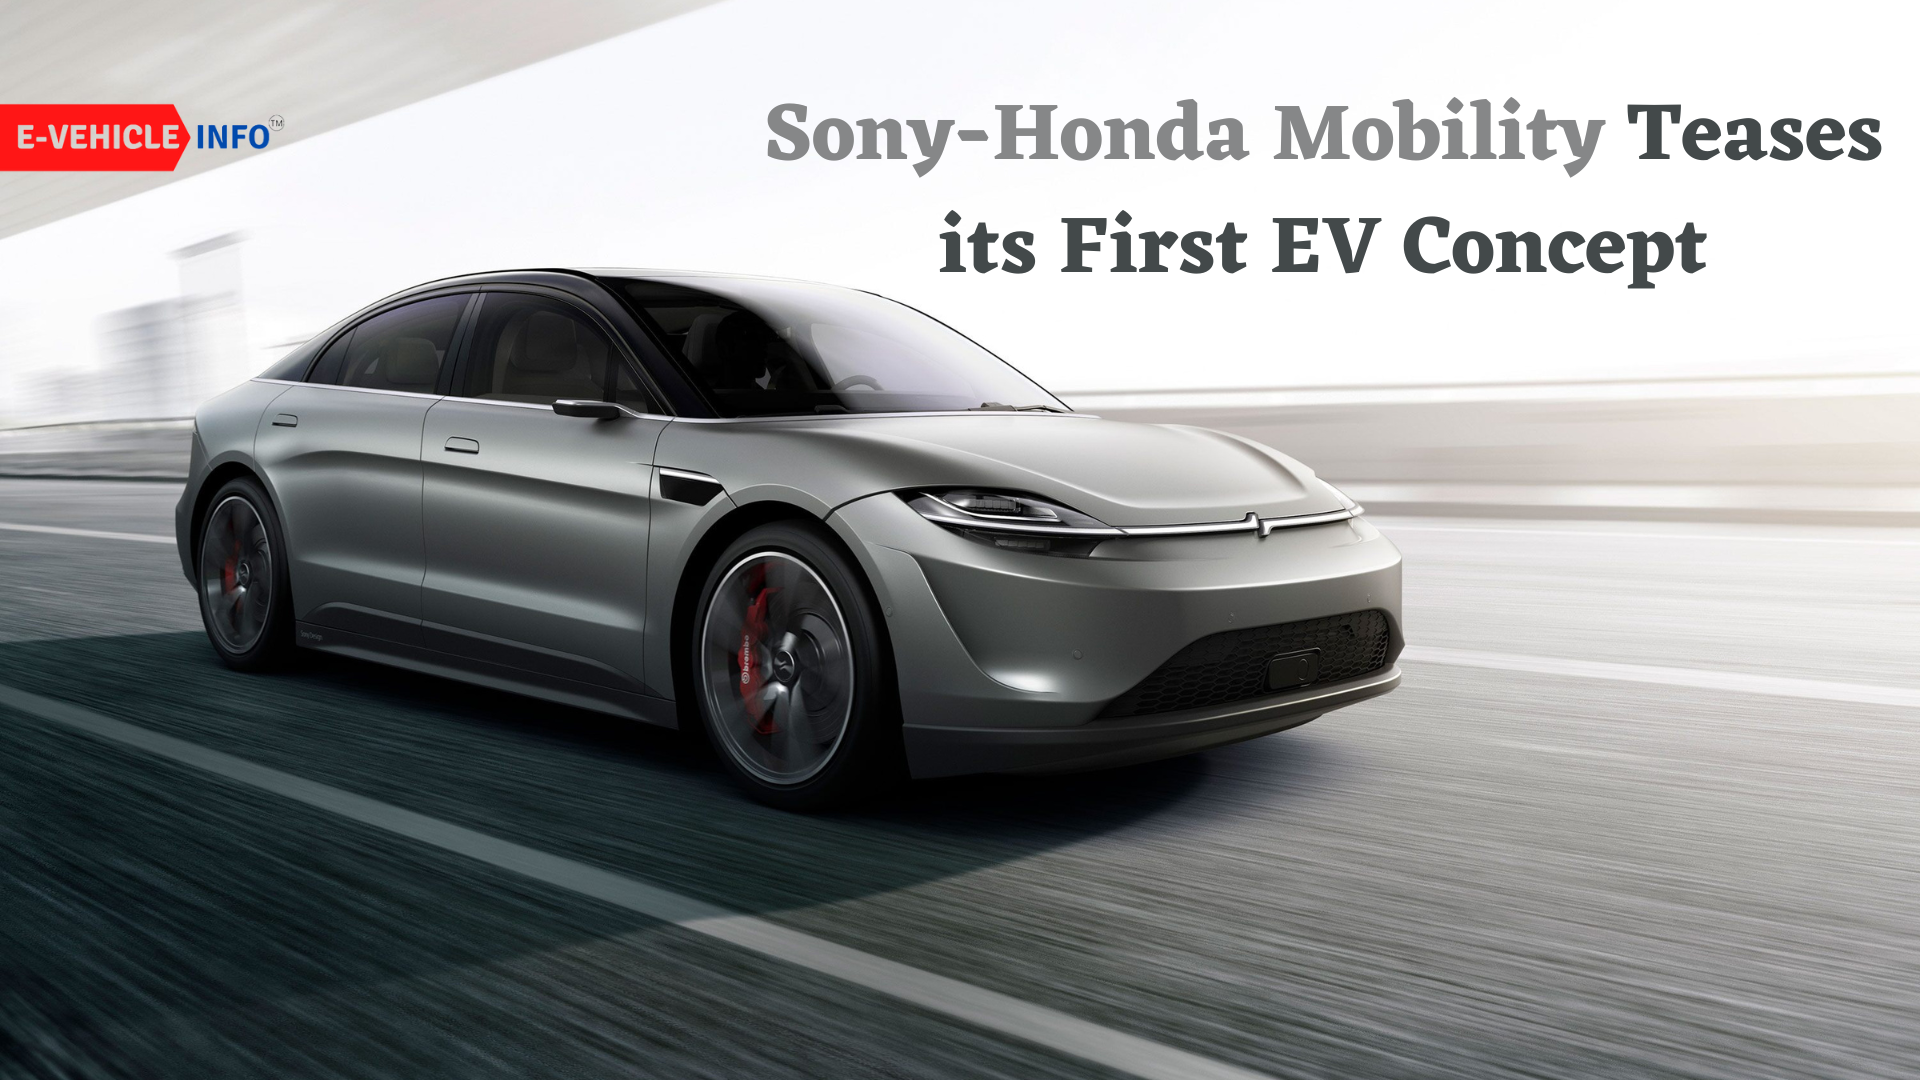 Sony-Honda Mobility Teases its First EV Concept ahead of unveil at Consumer Electronics Show